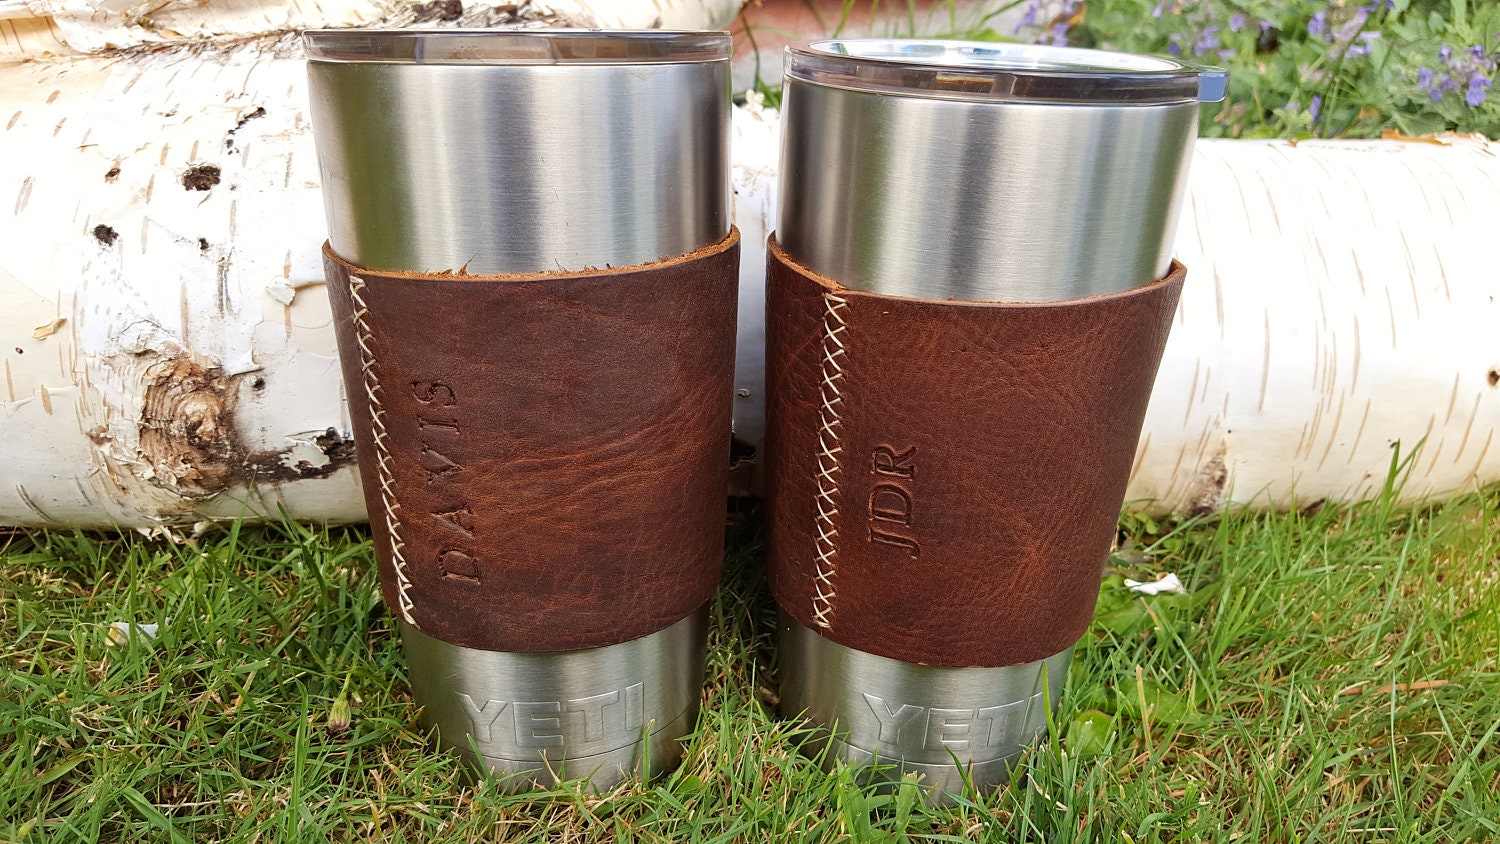 YETI 20oz Rambler Tumbler Insulated Cup Leather Sleeve Personalized 